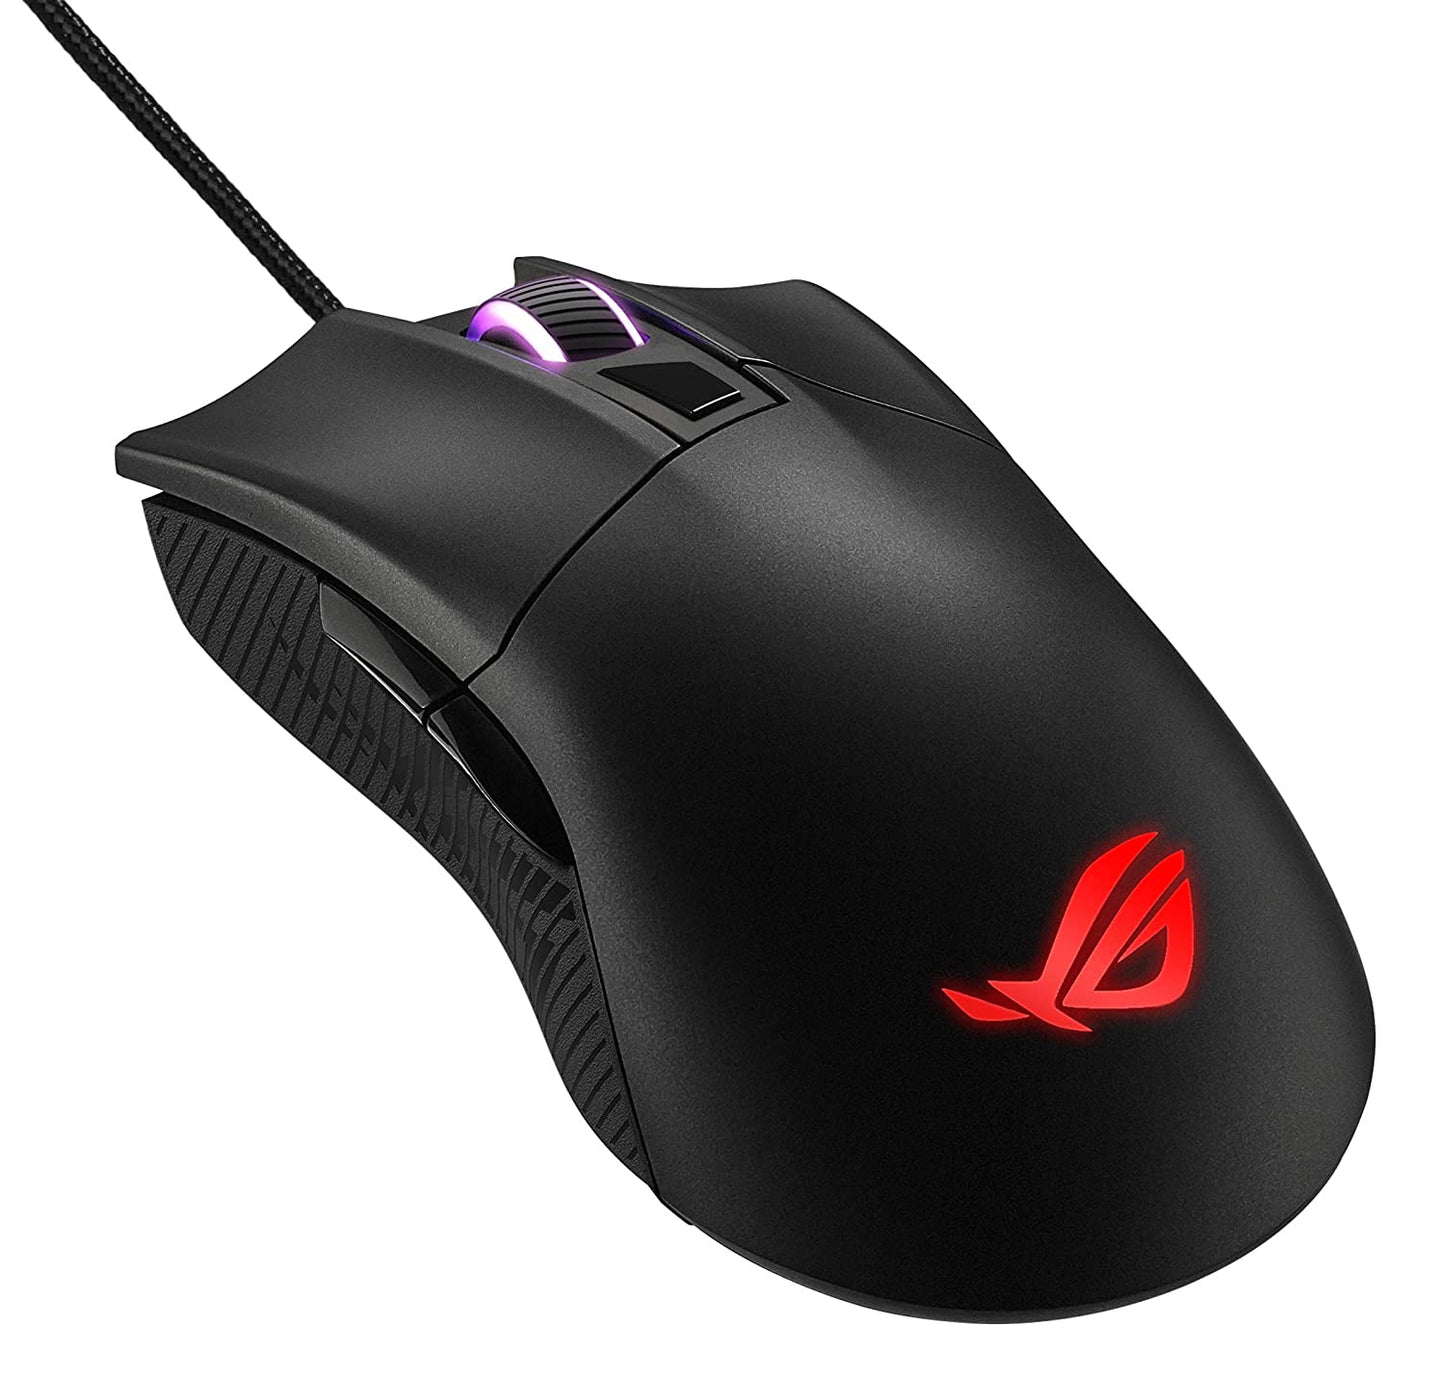 ASUS ROG Gladius II Core RGB Wired Optical Gaming Mouse with 6200 DPI